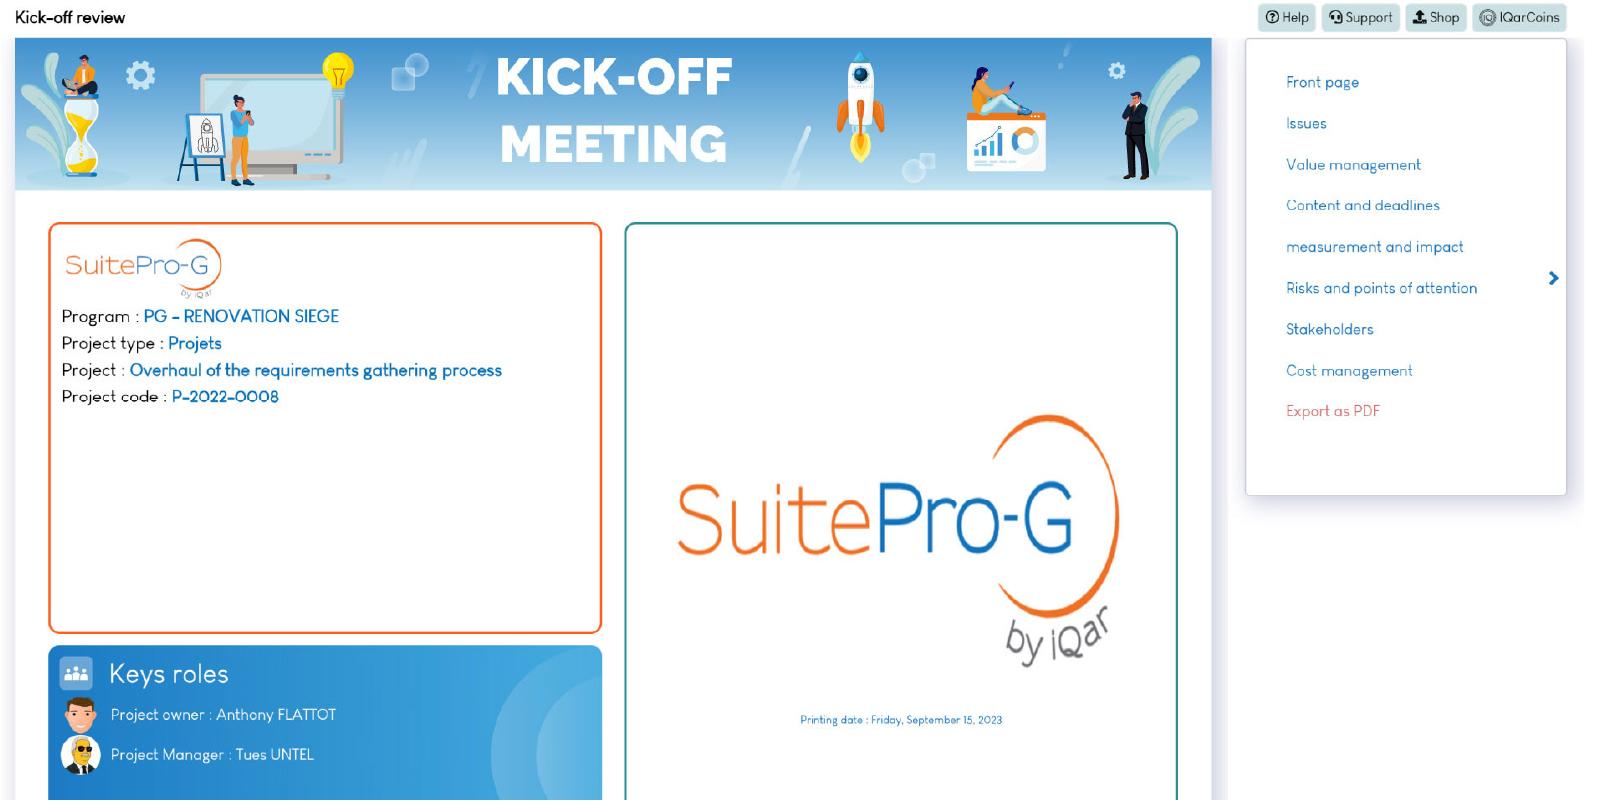 SuitePro-G - Monitor the quality and the efficacy of the project with the kick-off meeting report